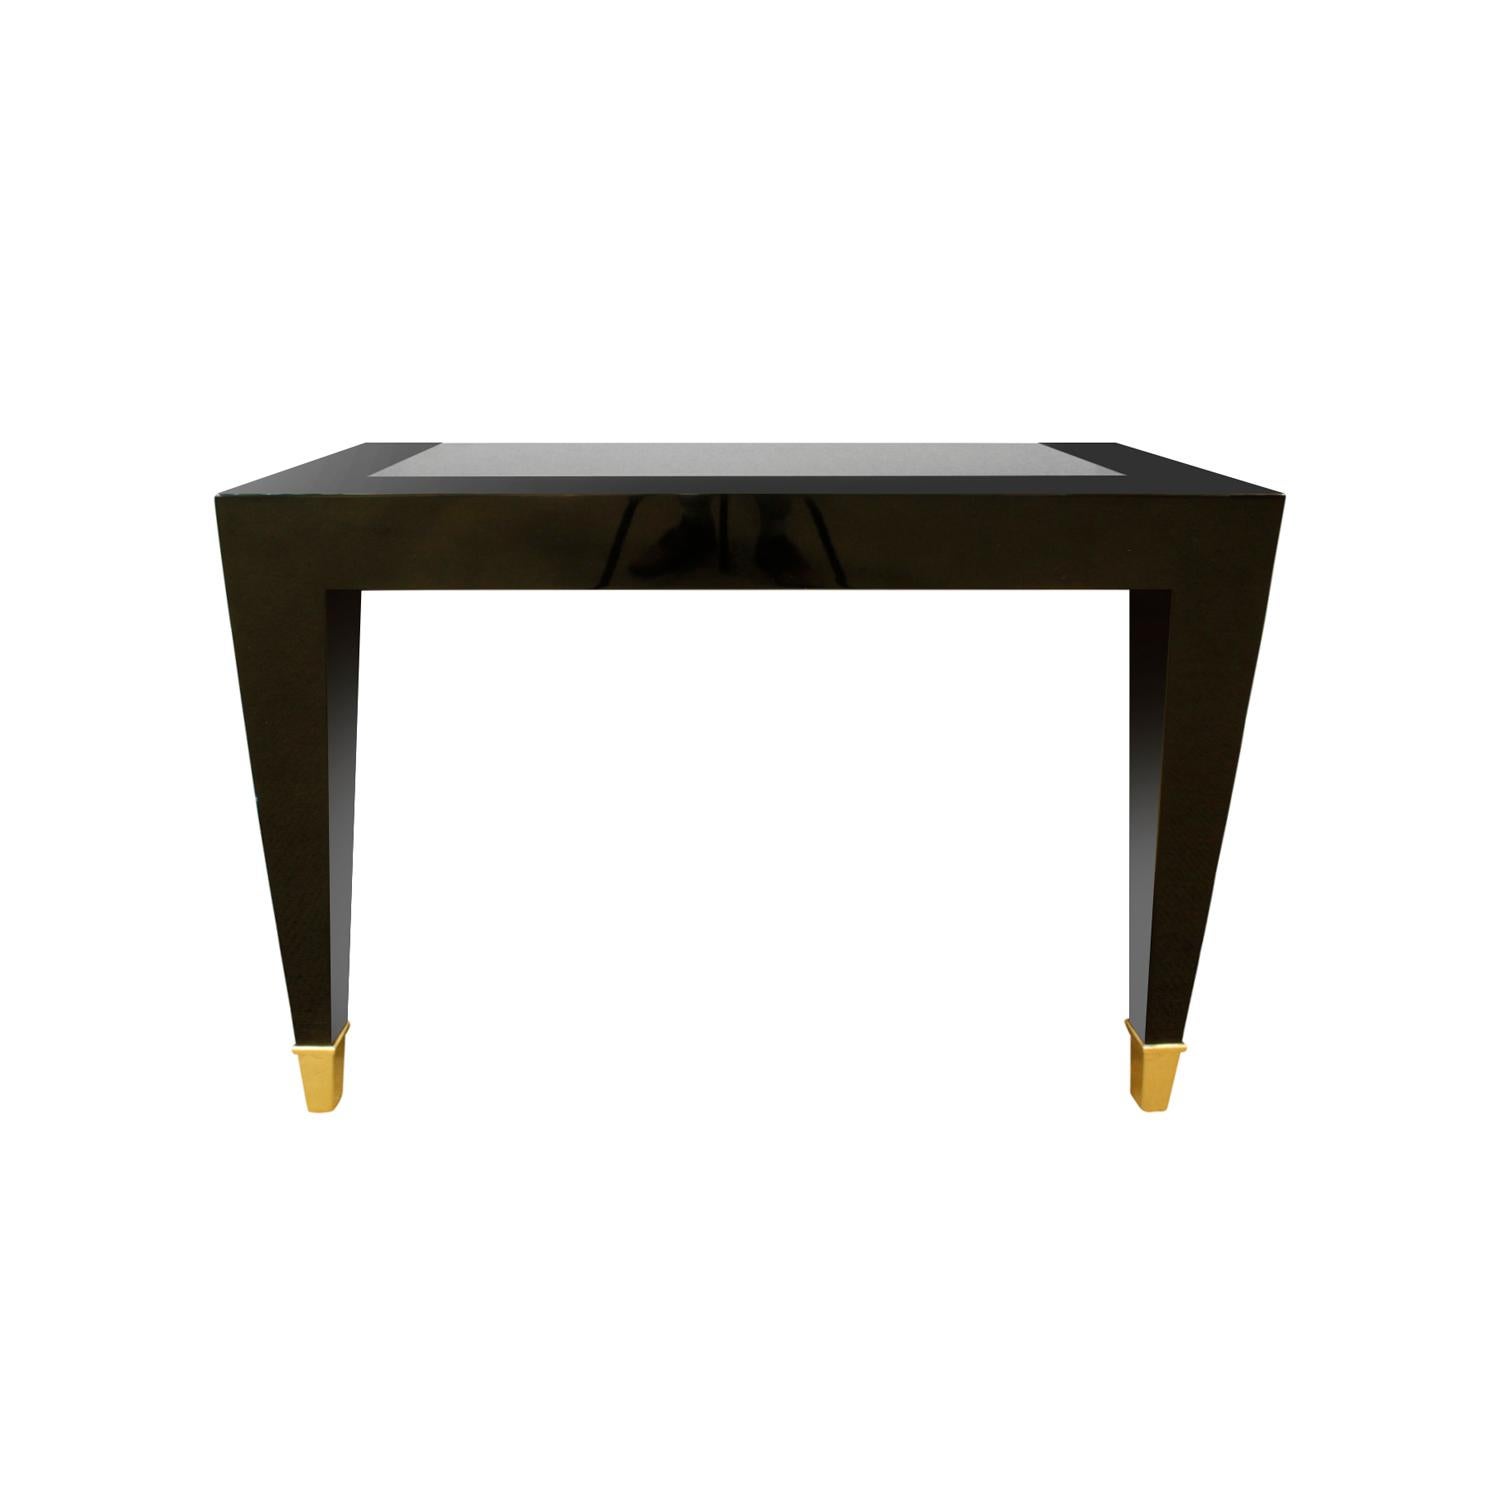 Wall-mounted console table in high gloss black lacquer with brass sabots and inset granite top by Pace Collection, American, 1980s. This console is very elegant.